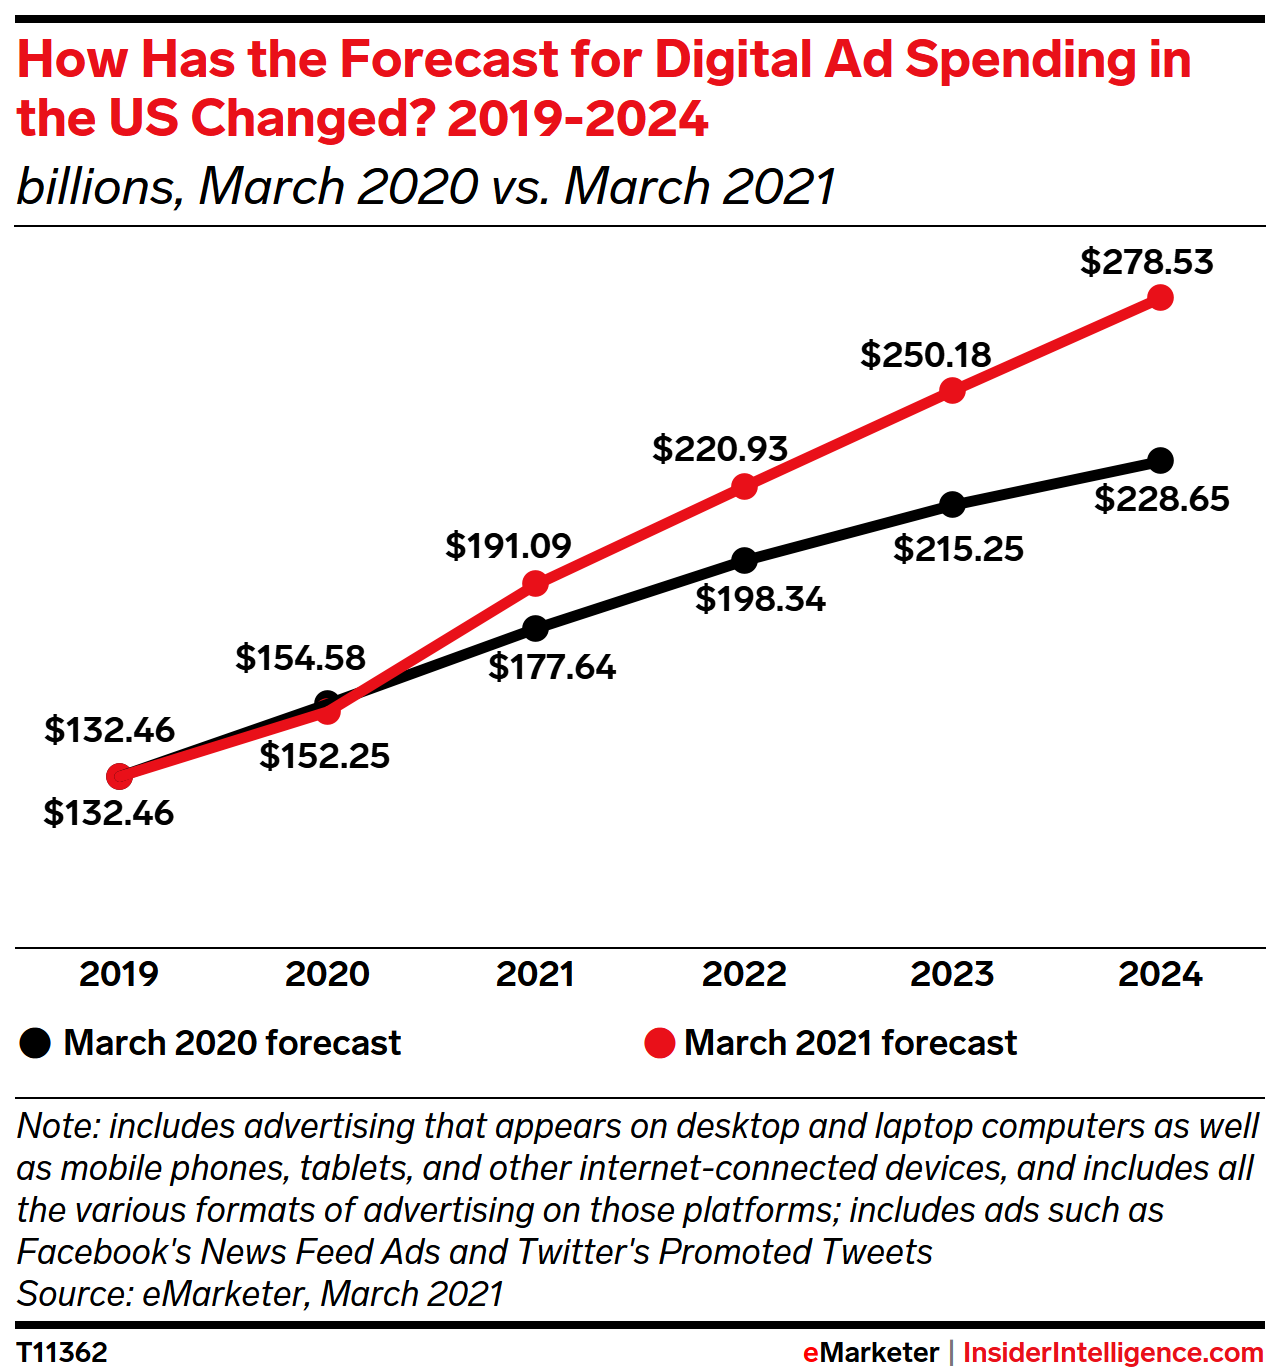 How Has the Forecast for Digital Ad Spending in the US Changed? 2019-2024 (billions)